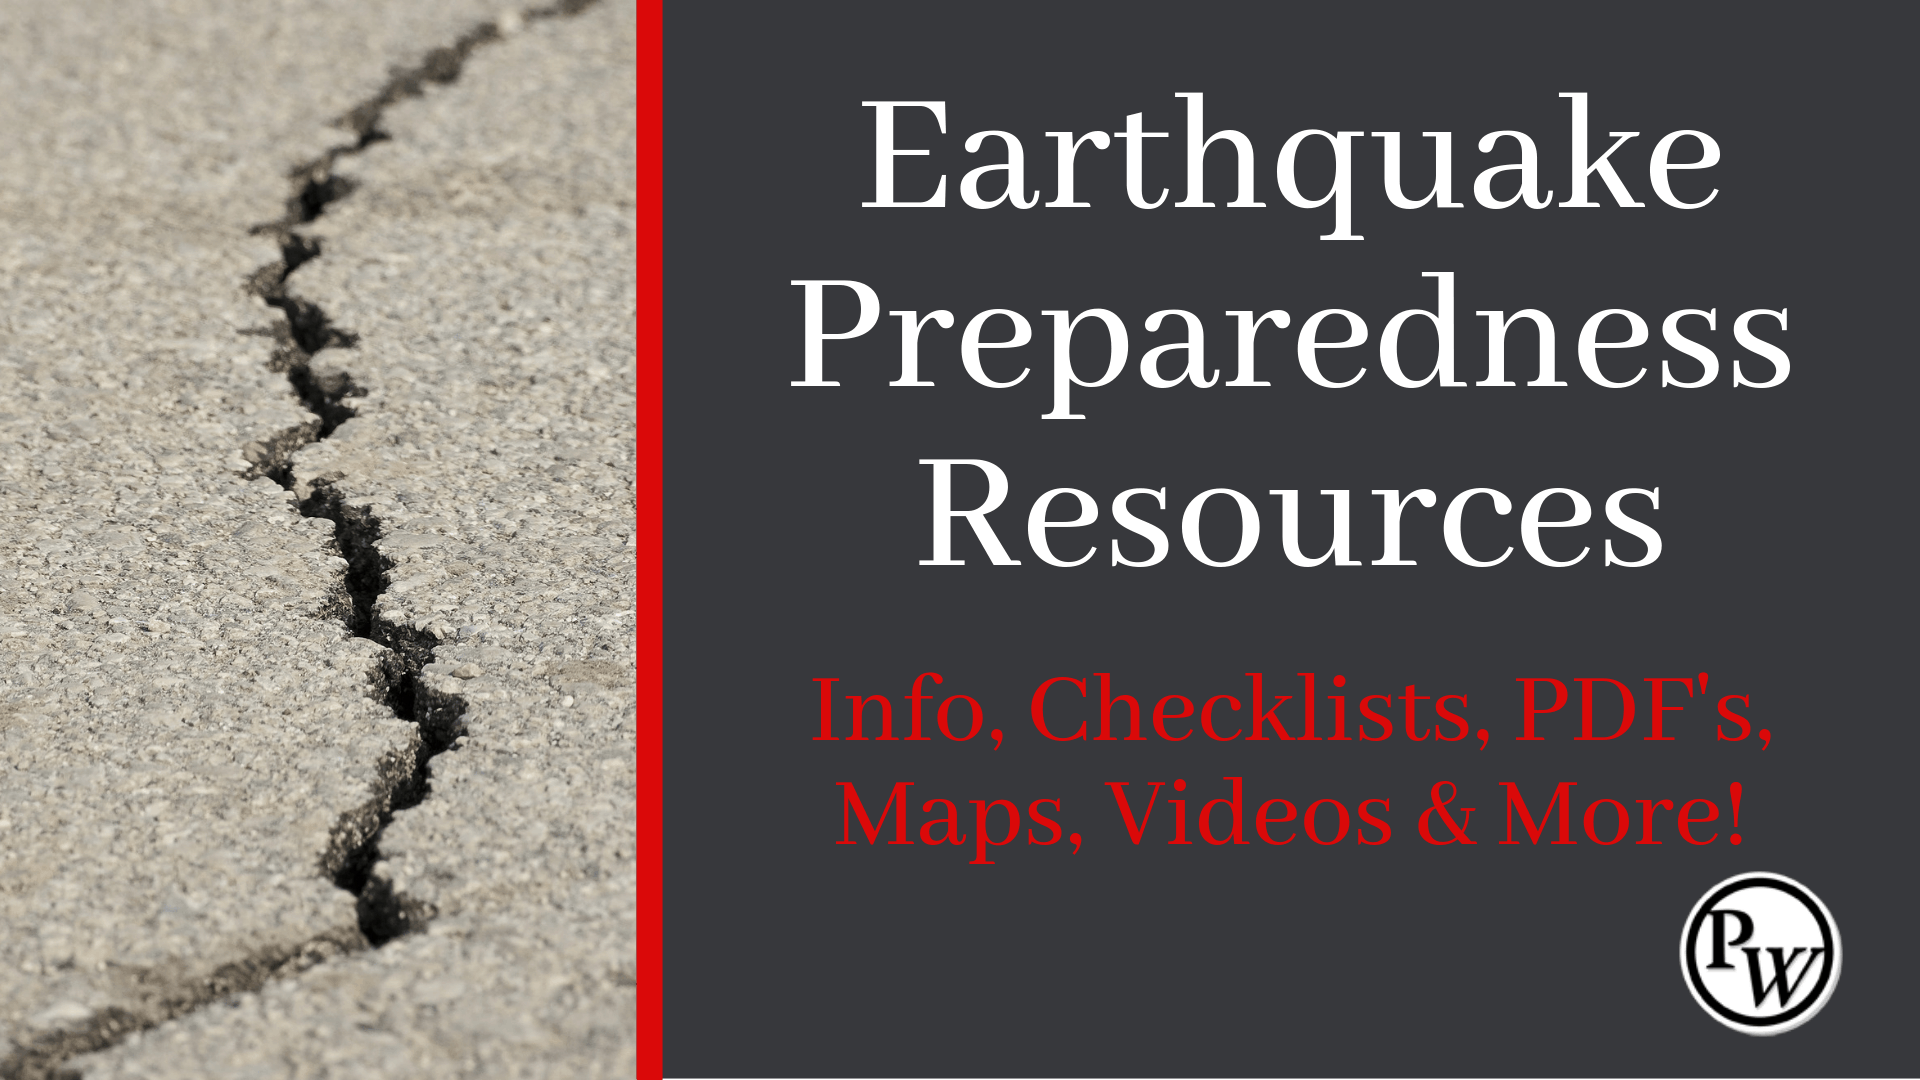 Prepper Resources for Earthquakes